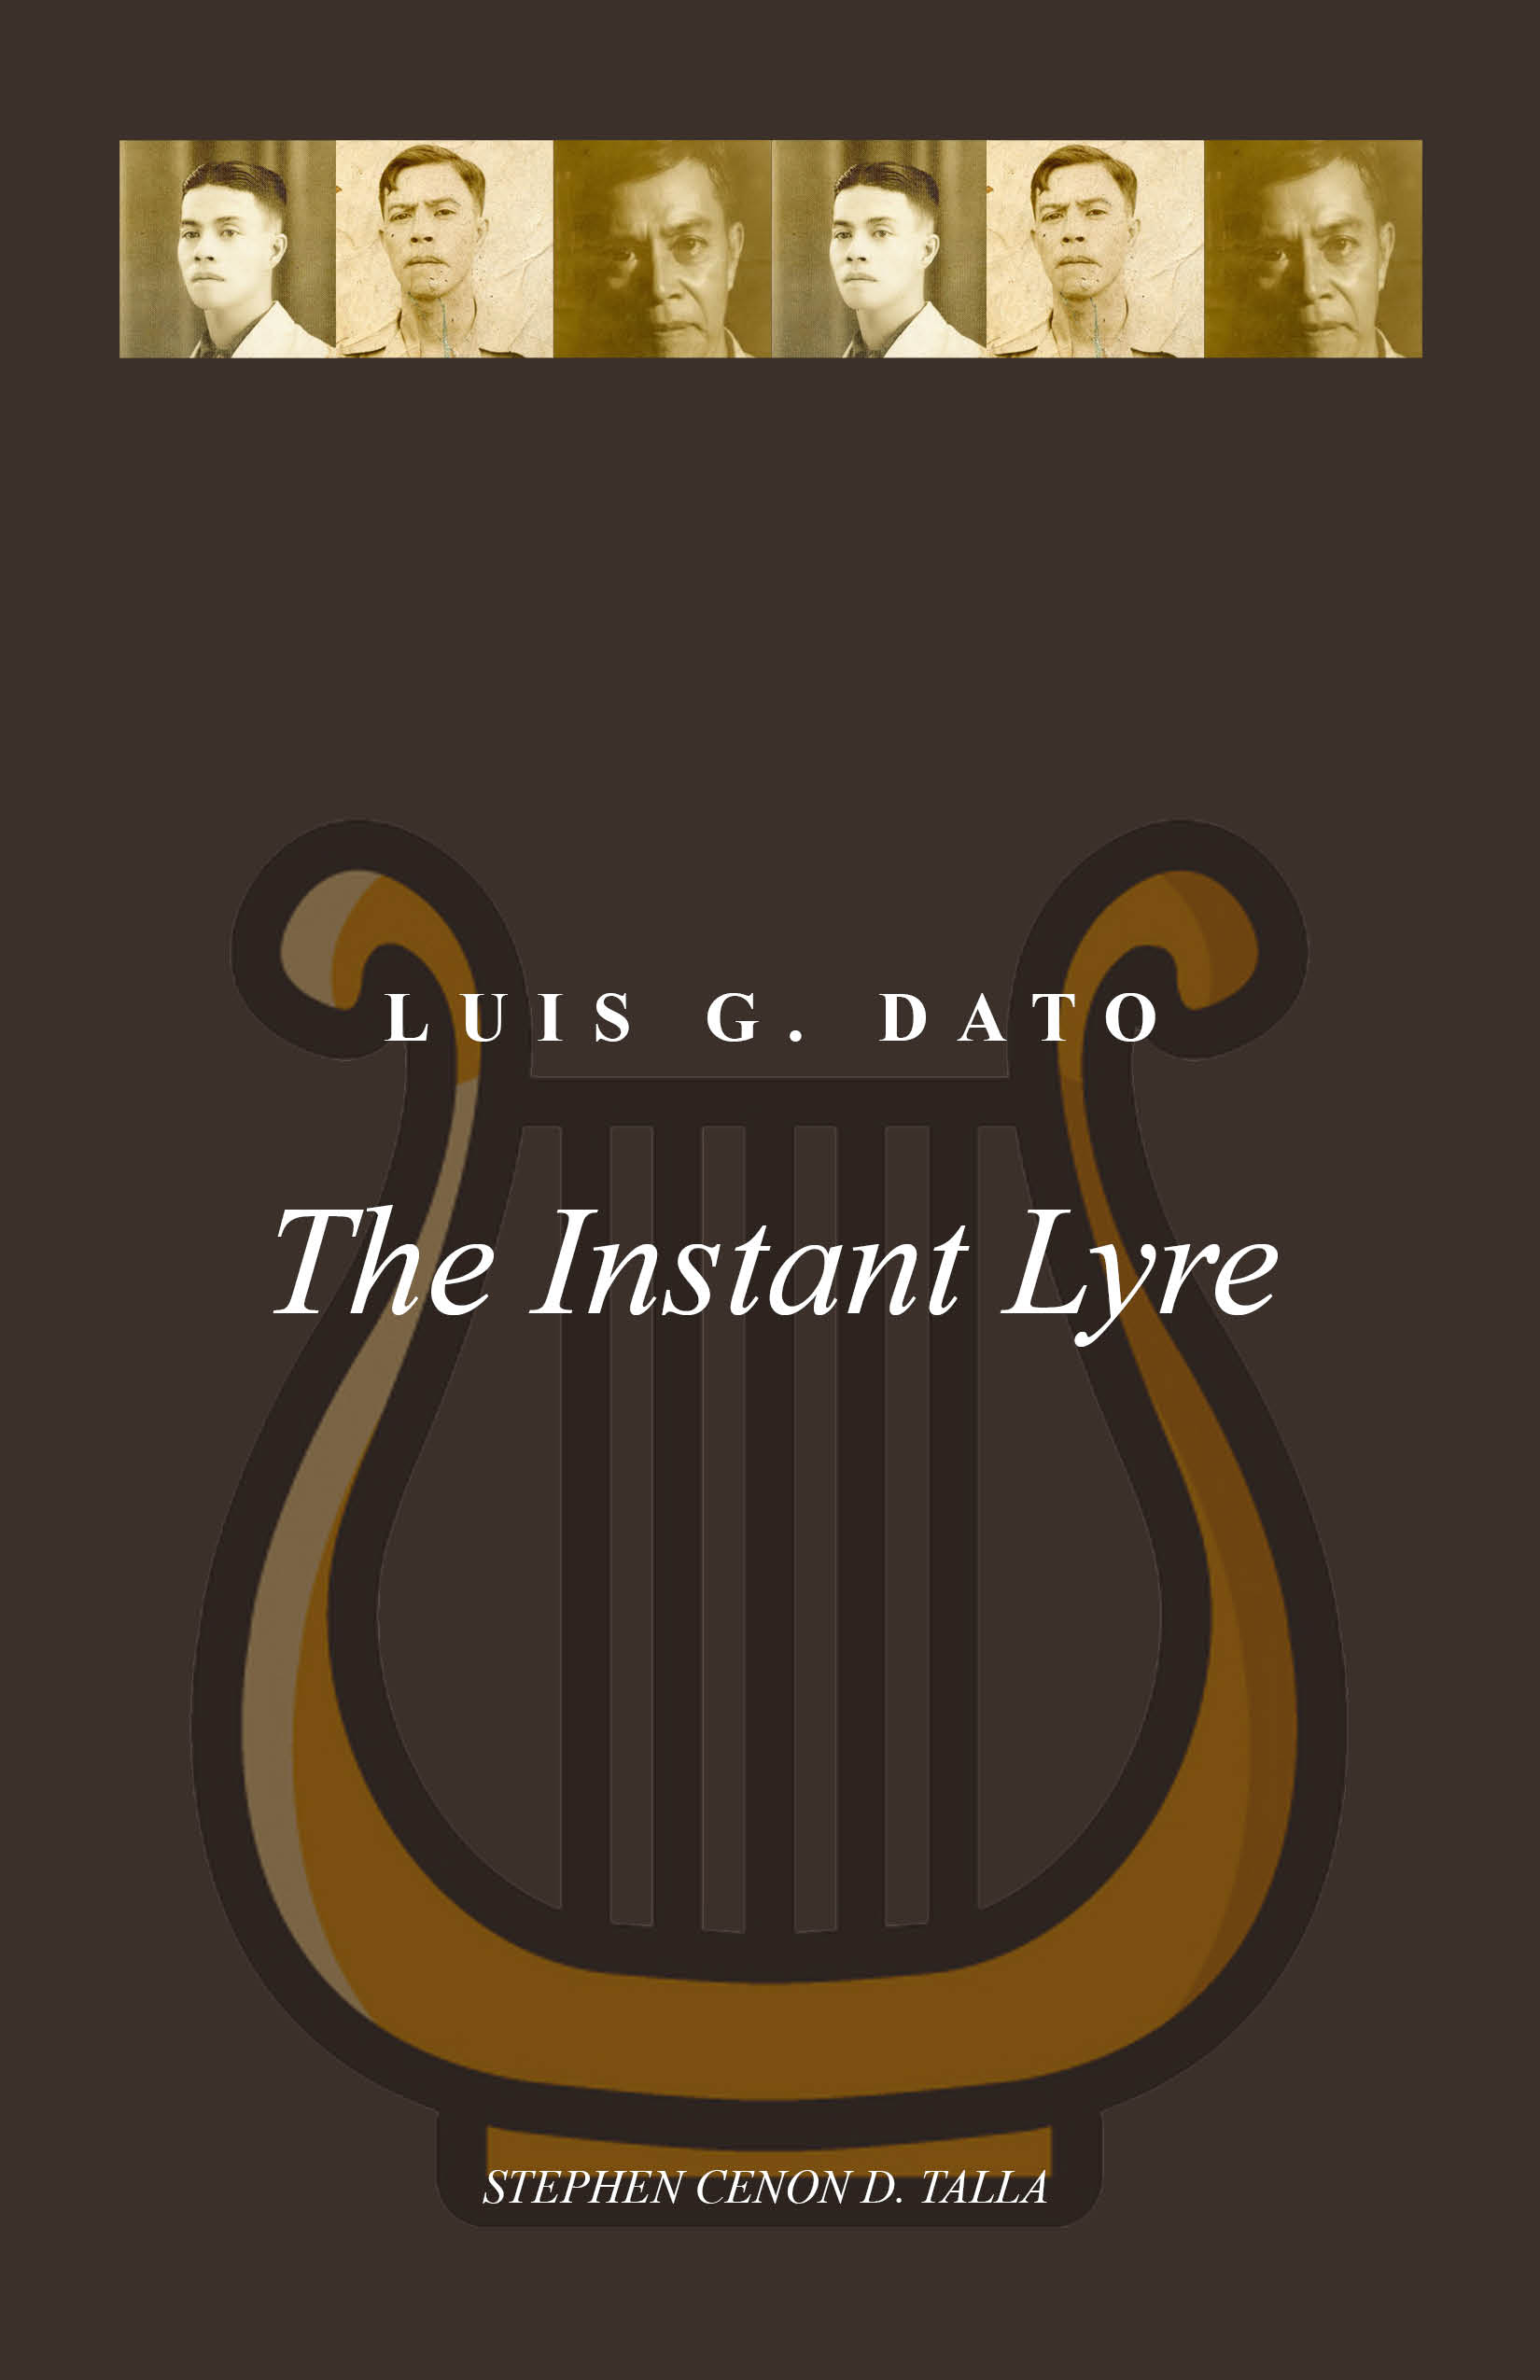 The Instant Lyre by Luis G. Dato